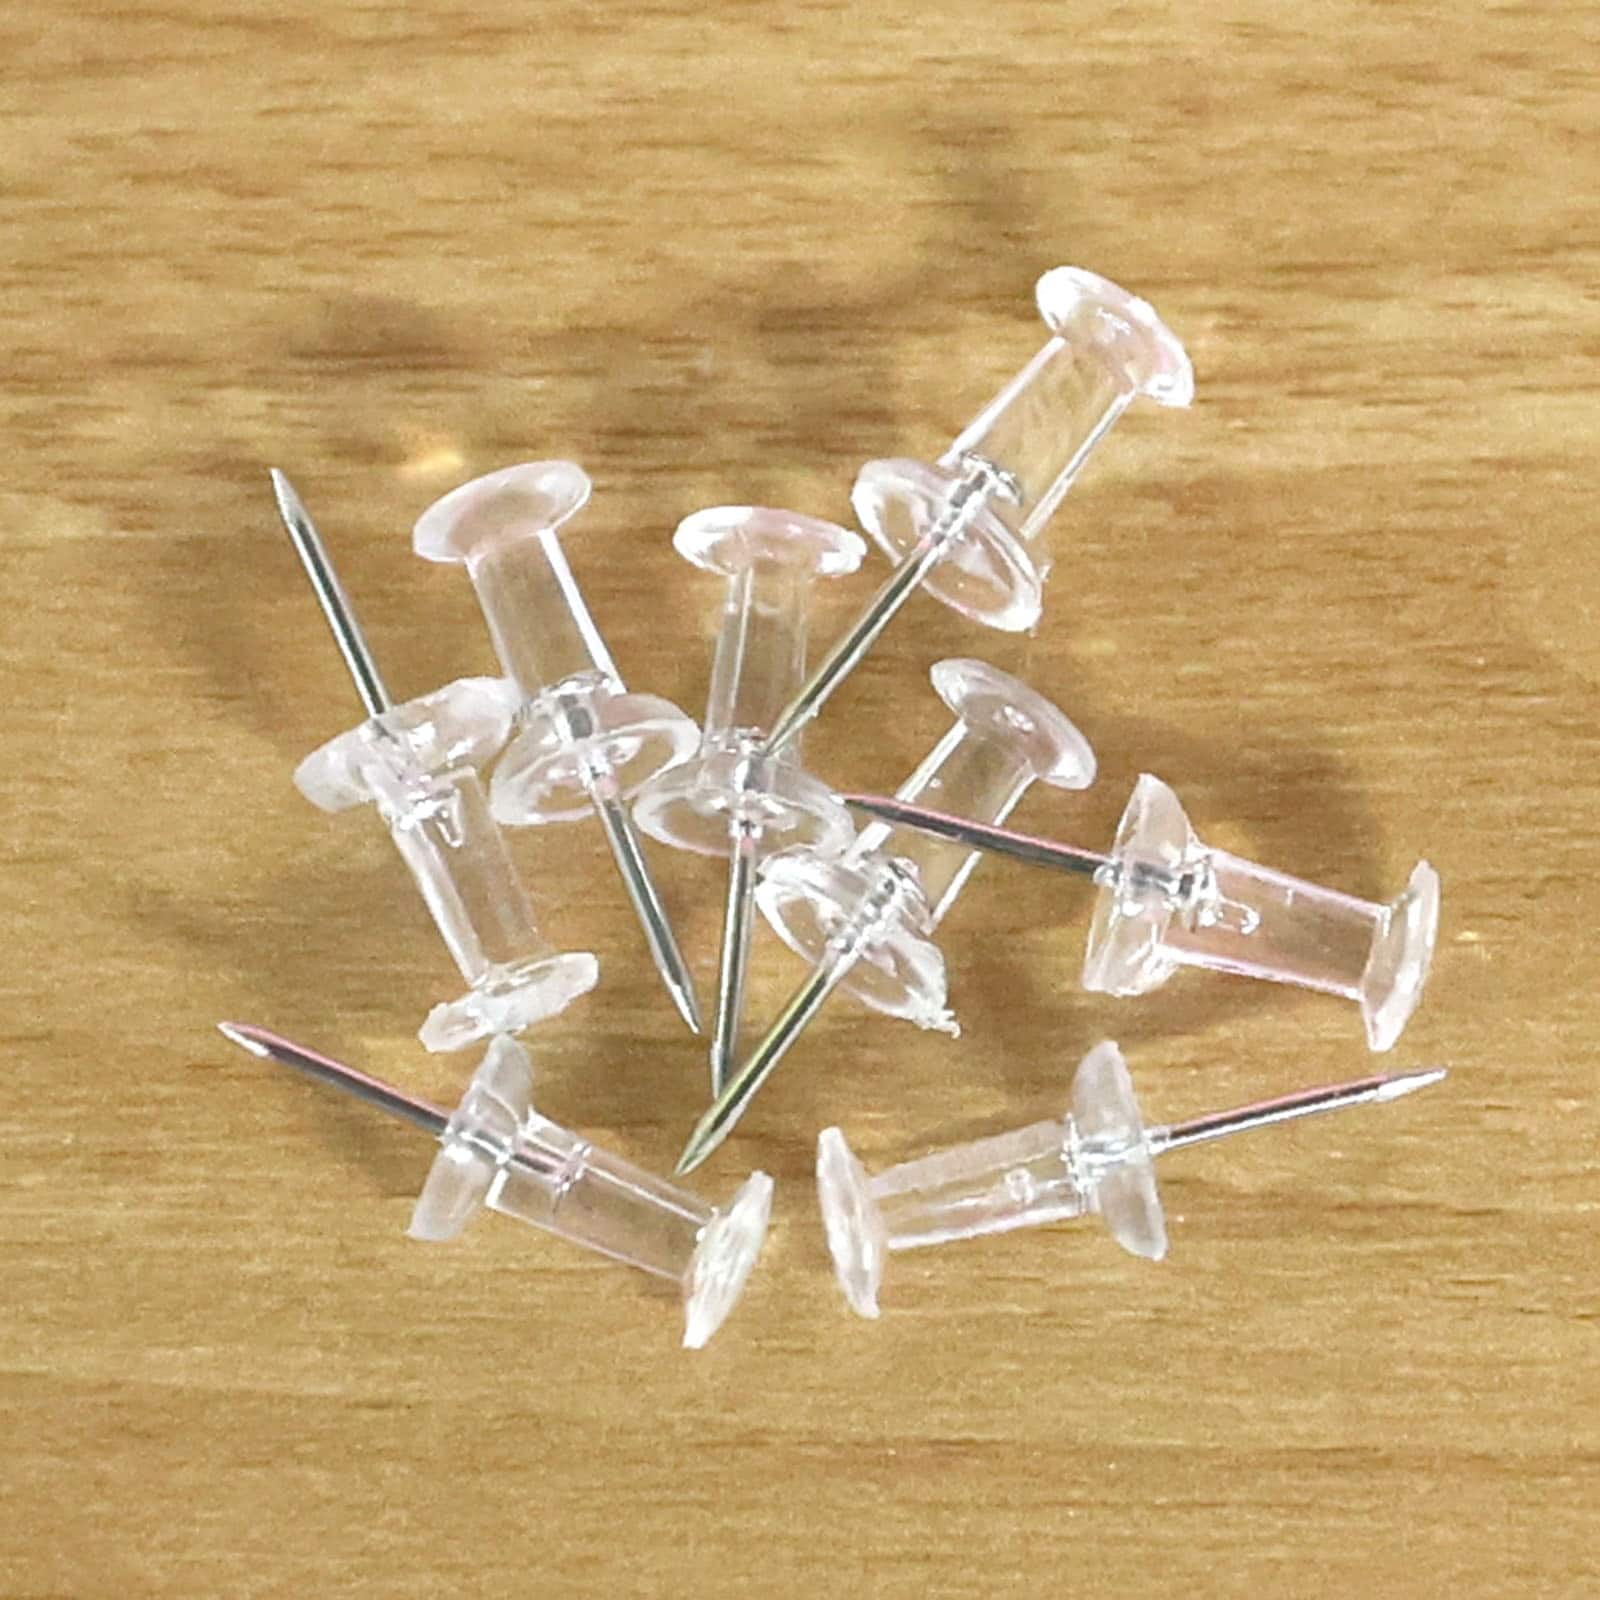 Save on Top Flight Push Pins Clear Order Online Delivery